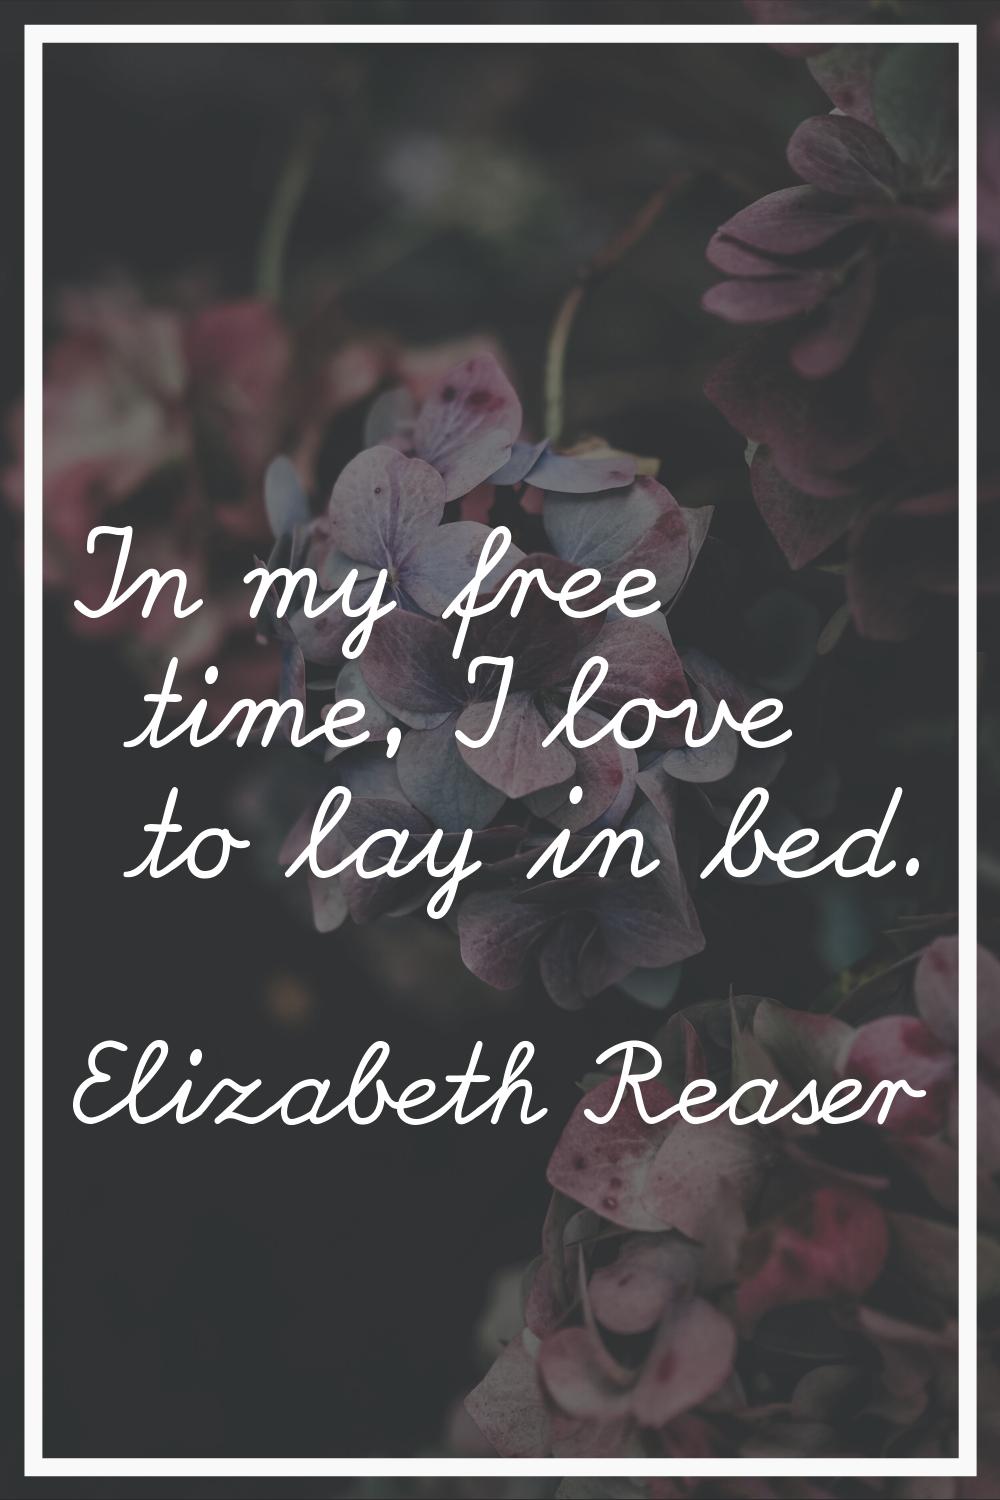 In my free time, I love to lay in bed.